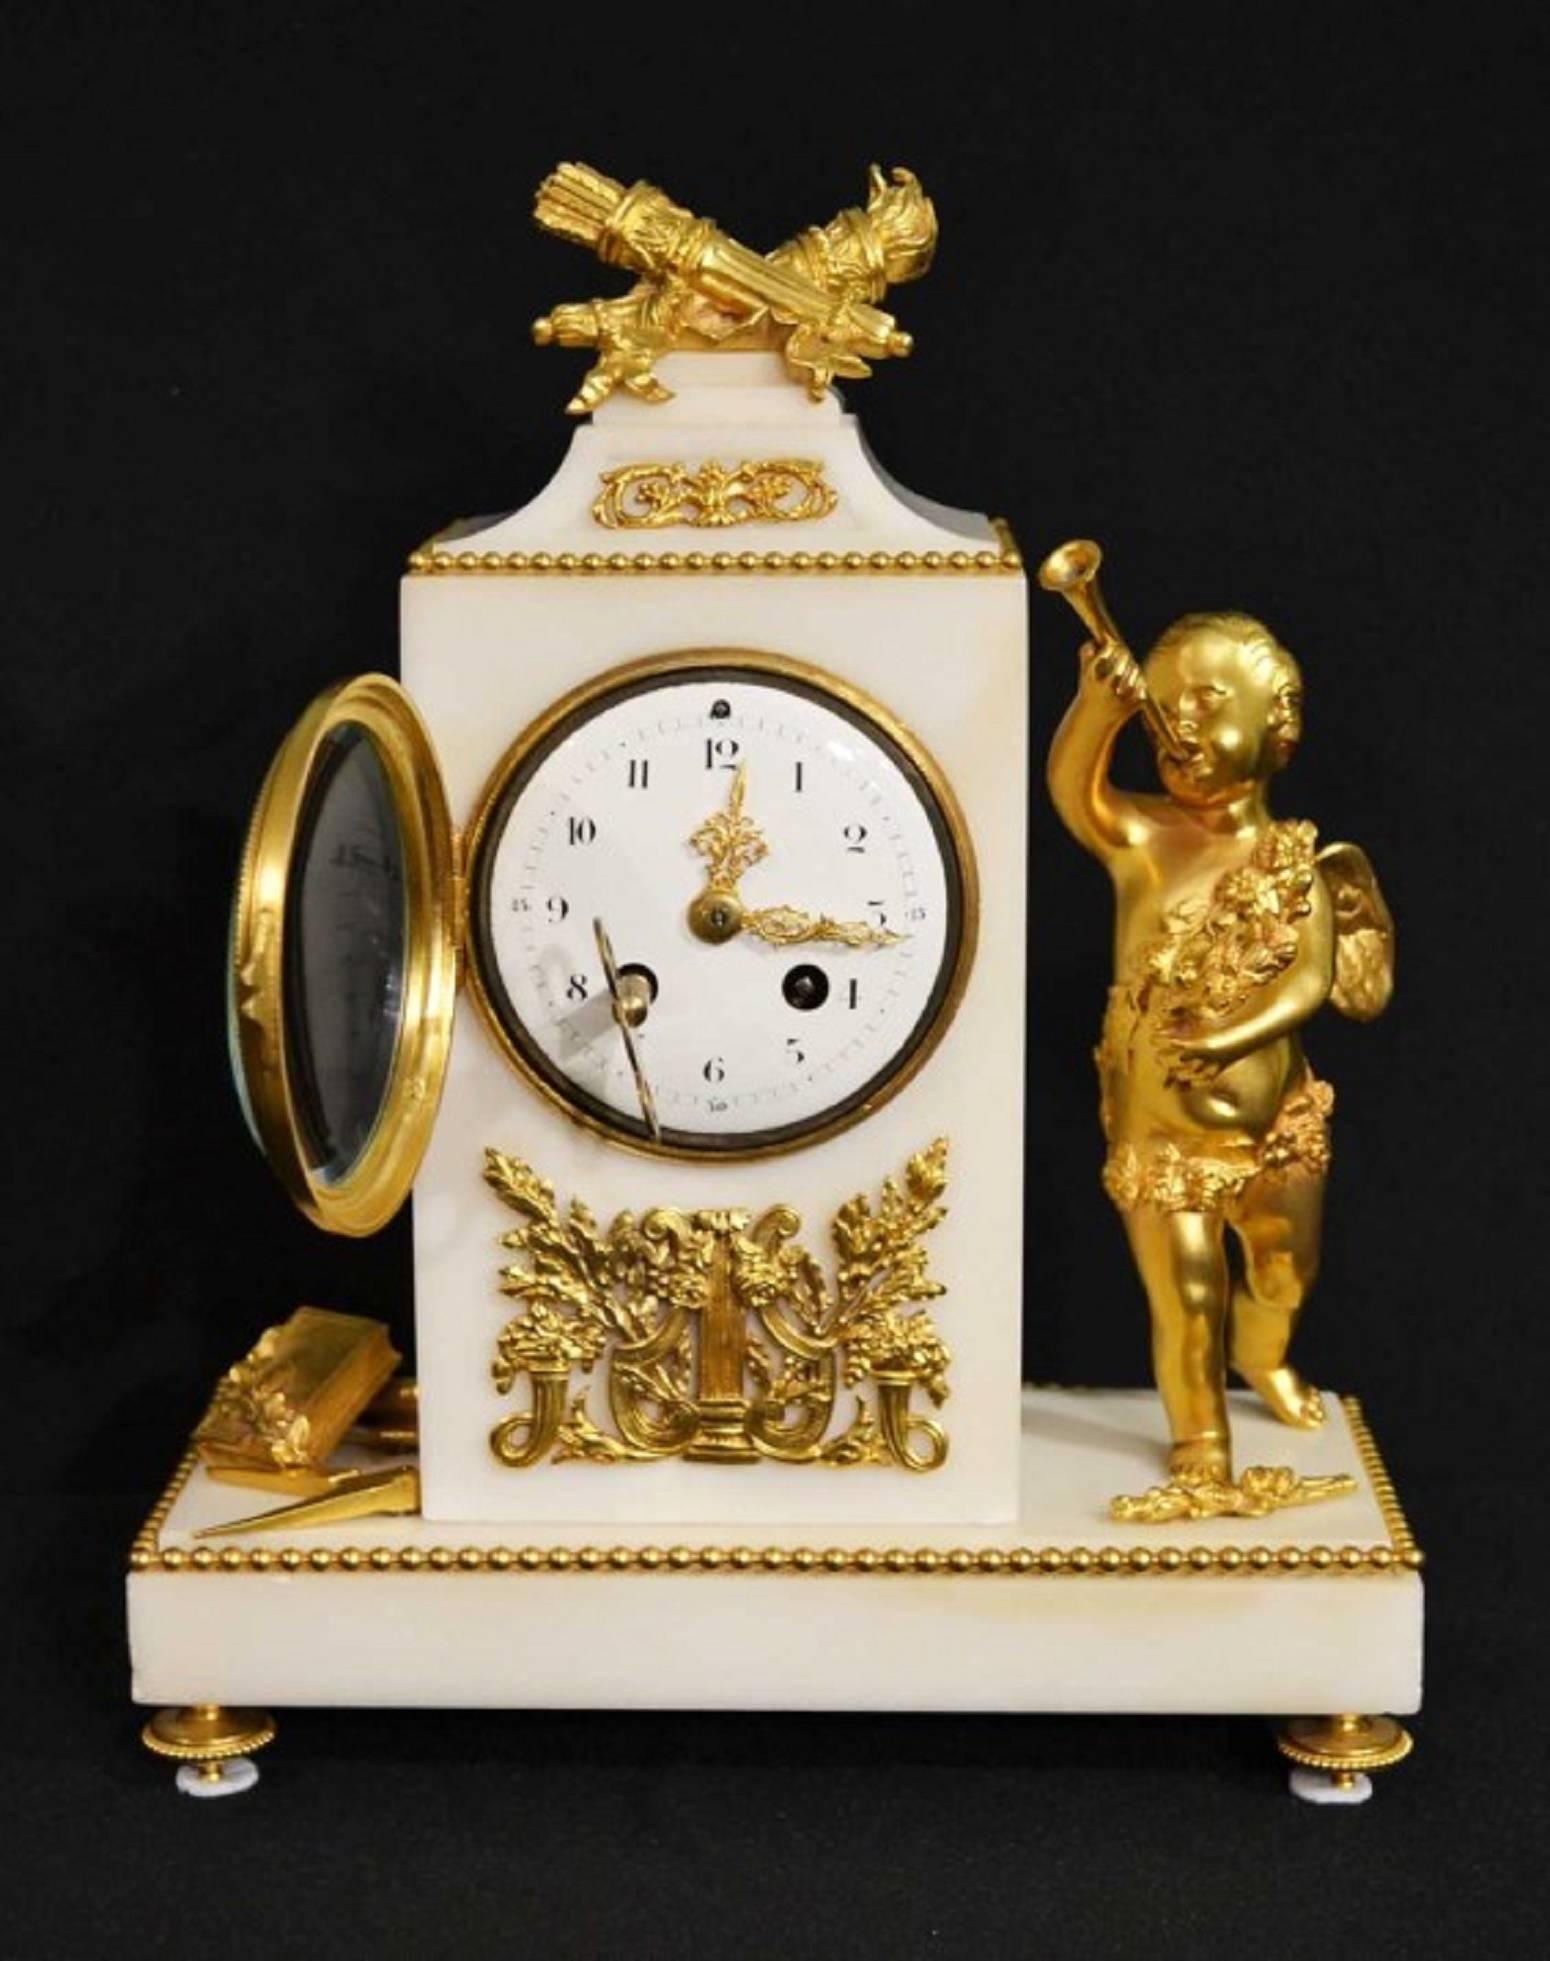 This is a fabulous white marble and ormolu mantel clock, circa 1850 in date.

This beautiful clock is surmounted by a flaming torch and quiver with arrows alongside a figure of Cupid blowing a horn. The other side has a compass and square which